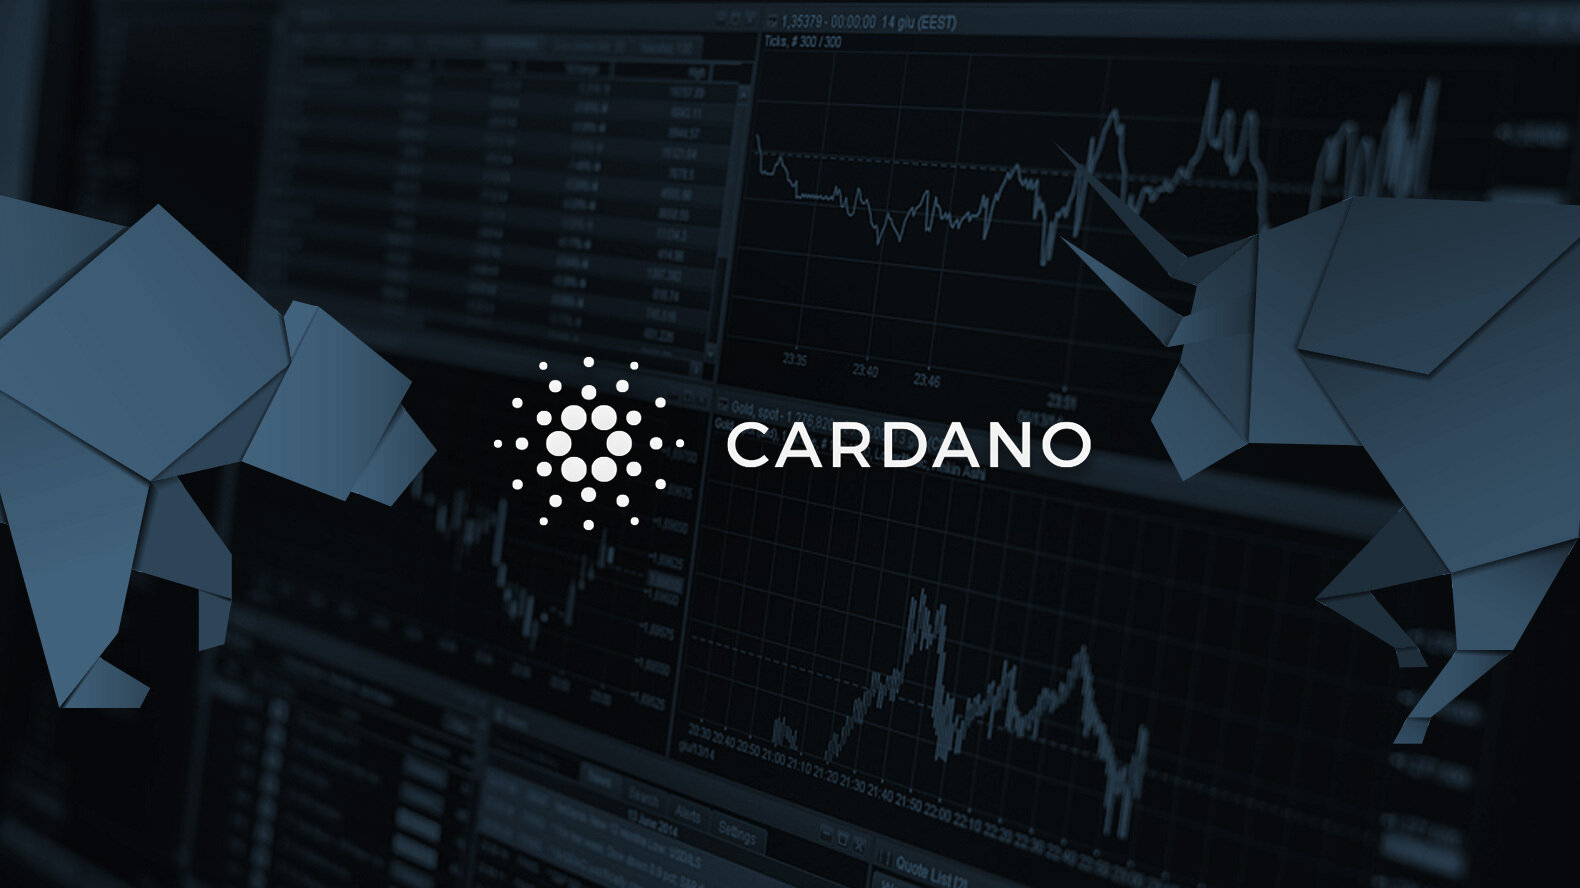 Cardano to Introduce a DeFi Loan Service in Africa